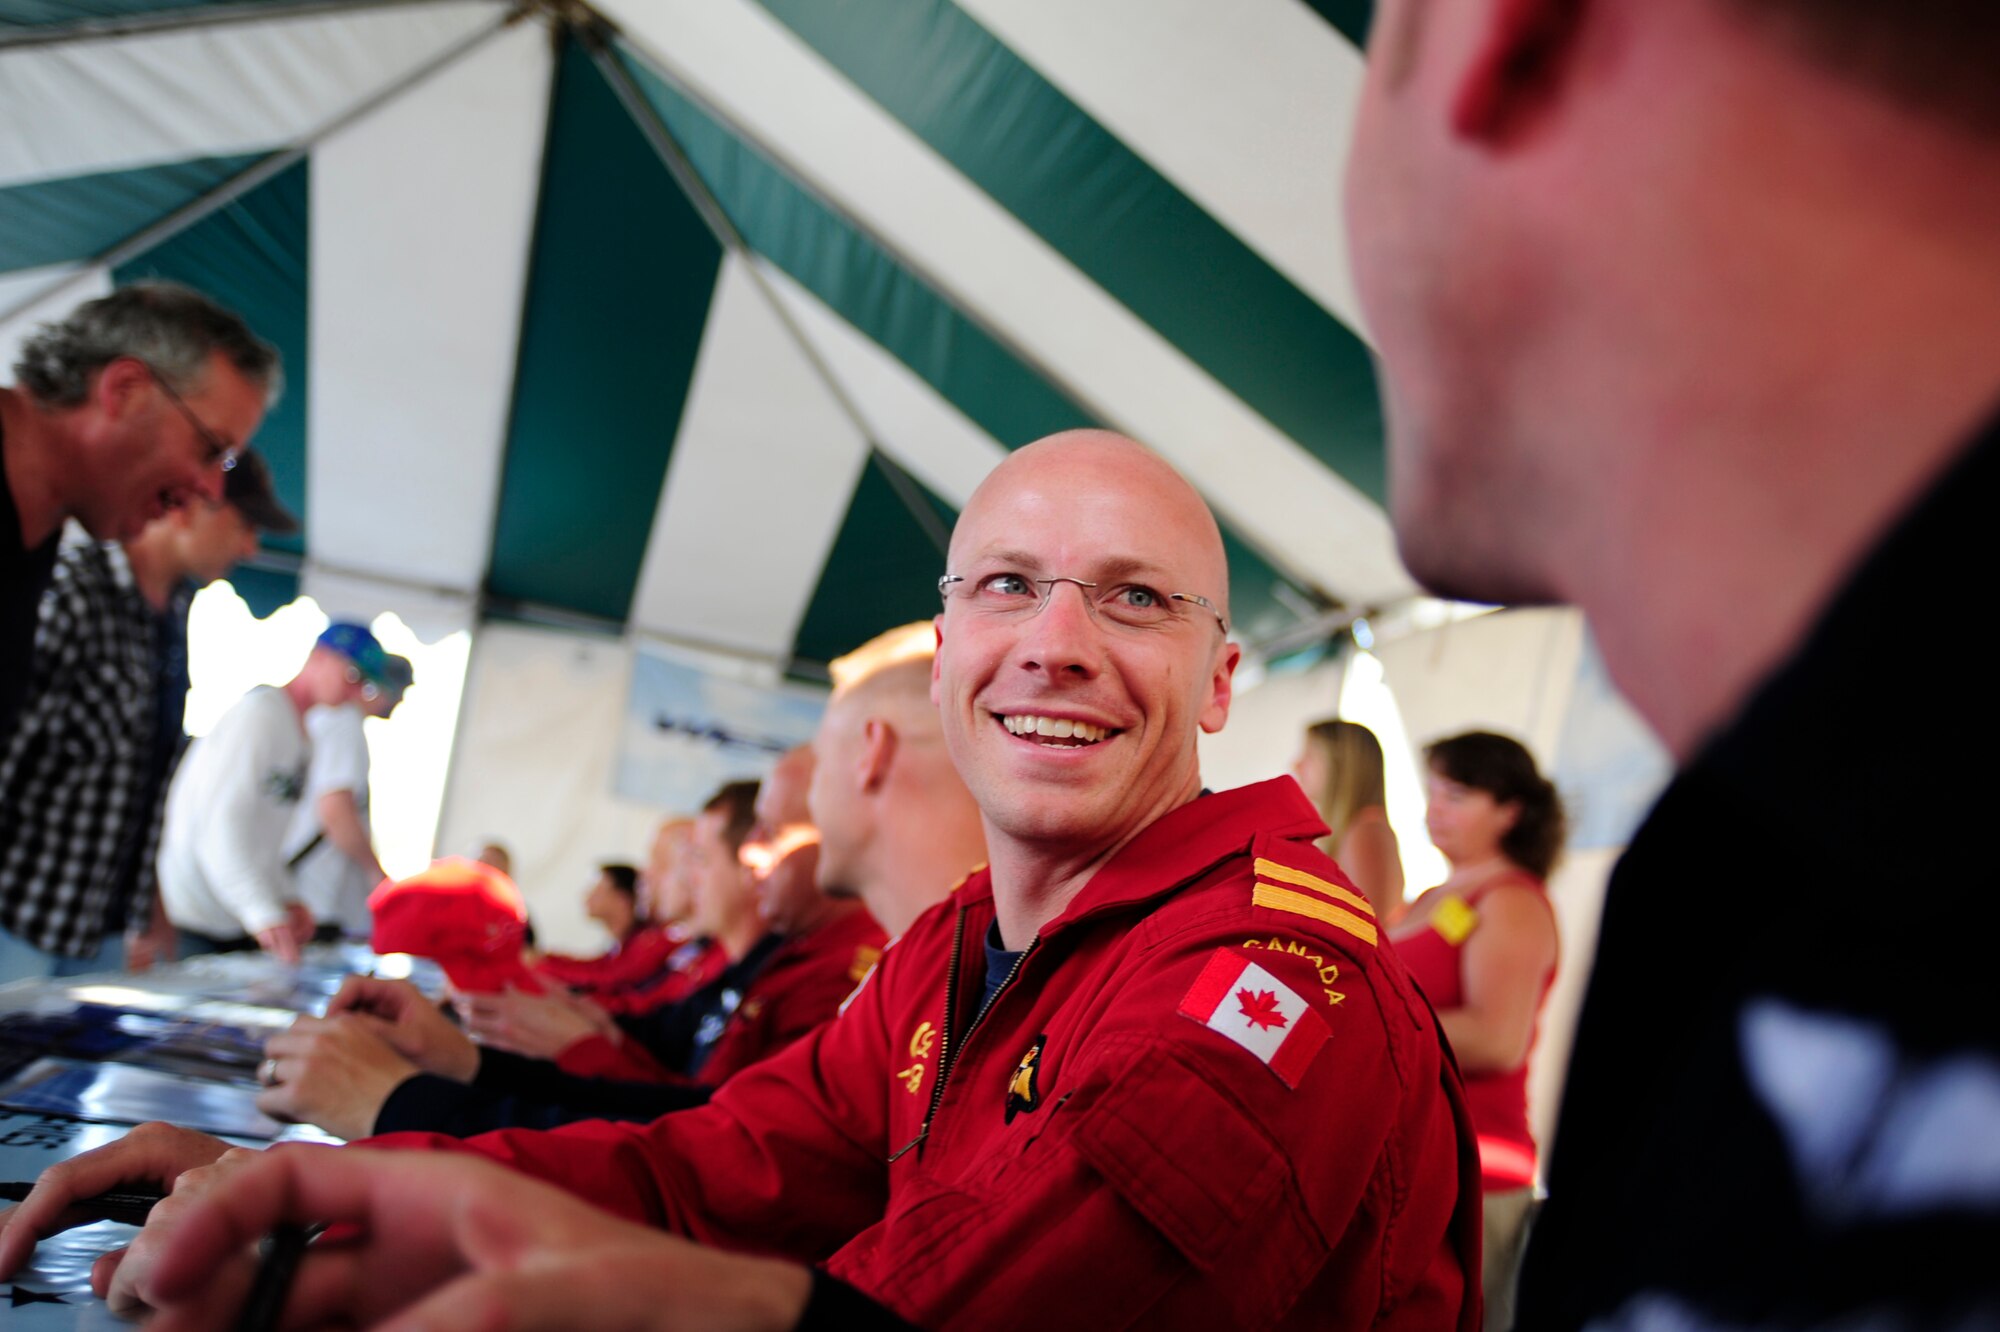 Royal Canadian Air Force Capt. Brent Handy, Snowbird 9 opposing solo pilot jokes with U.S. Air Force Maj. Michael Carletti, Thunderbird 9, flight surgeon, during a joint autograph session at the Abbotsford International Air Show,  Aug.10, 2012. The U.S. Air Force Air Demonstration Squadron "Thunderbirds," performed alongside the Royal Canadian Air Force "Snowbirds" Aug. 10 through 12.  This year's  marked the 50th year of the Abbotsford International Air Show.  (U.S. Air Force photo/Tech Sgt. Manuel J. Martinez)(Released)